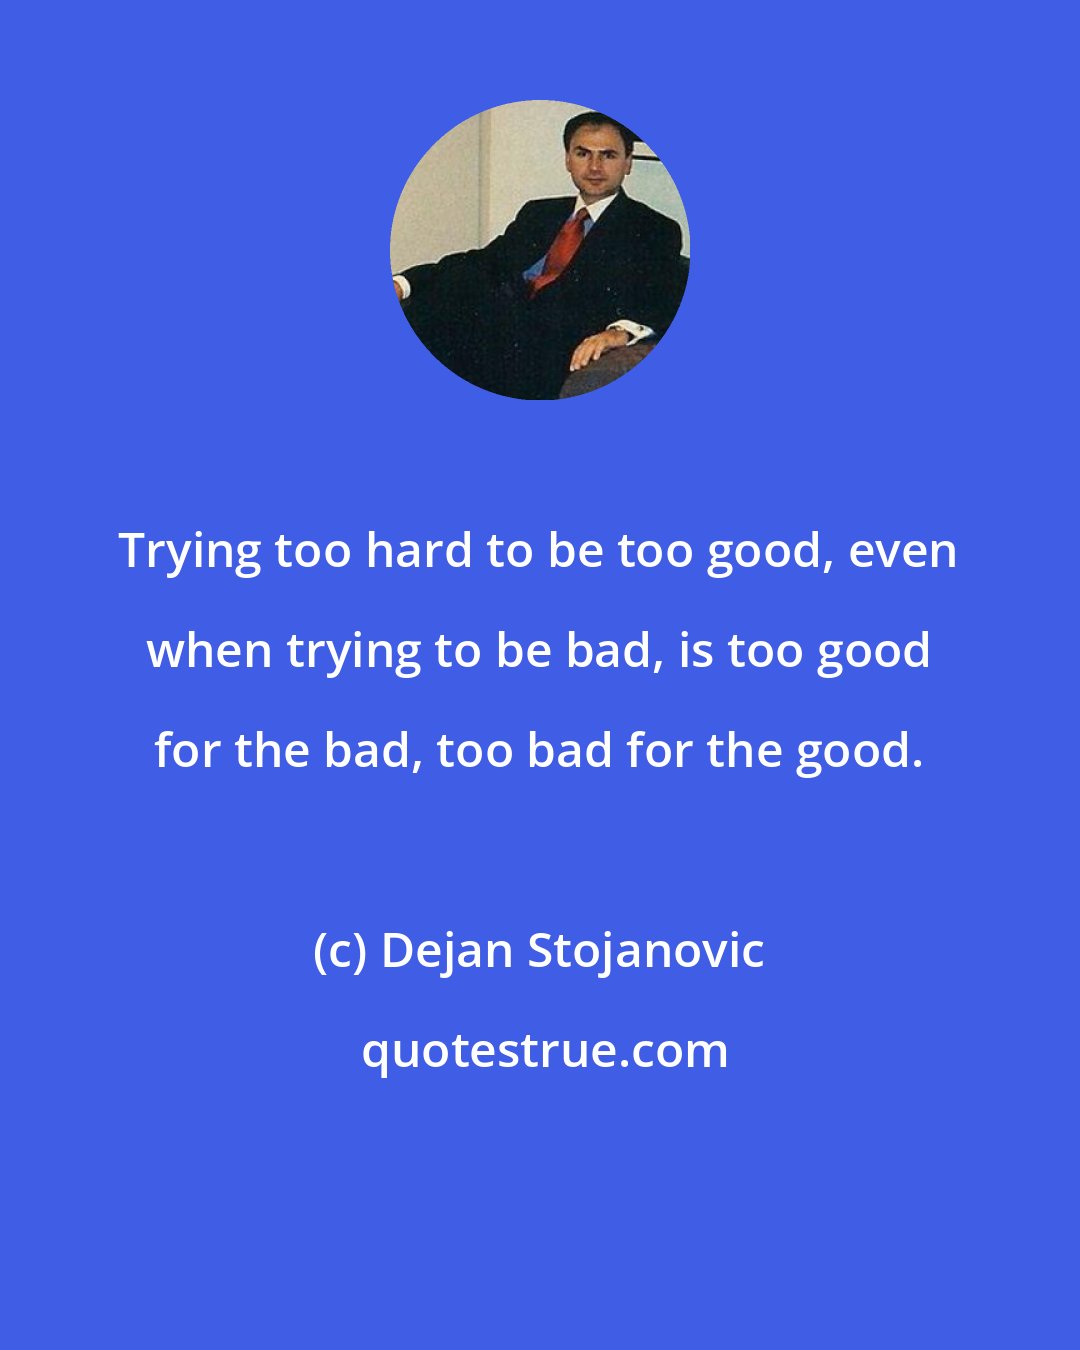 Dejan Stojanovic: Trying too hard to be too good, even when trying to be bad, is too good for the bad, too bad for the good.